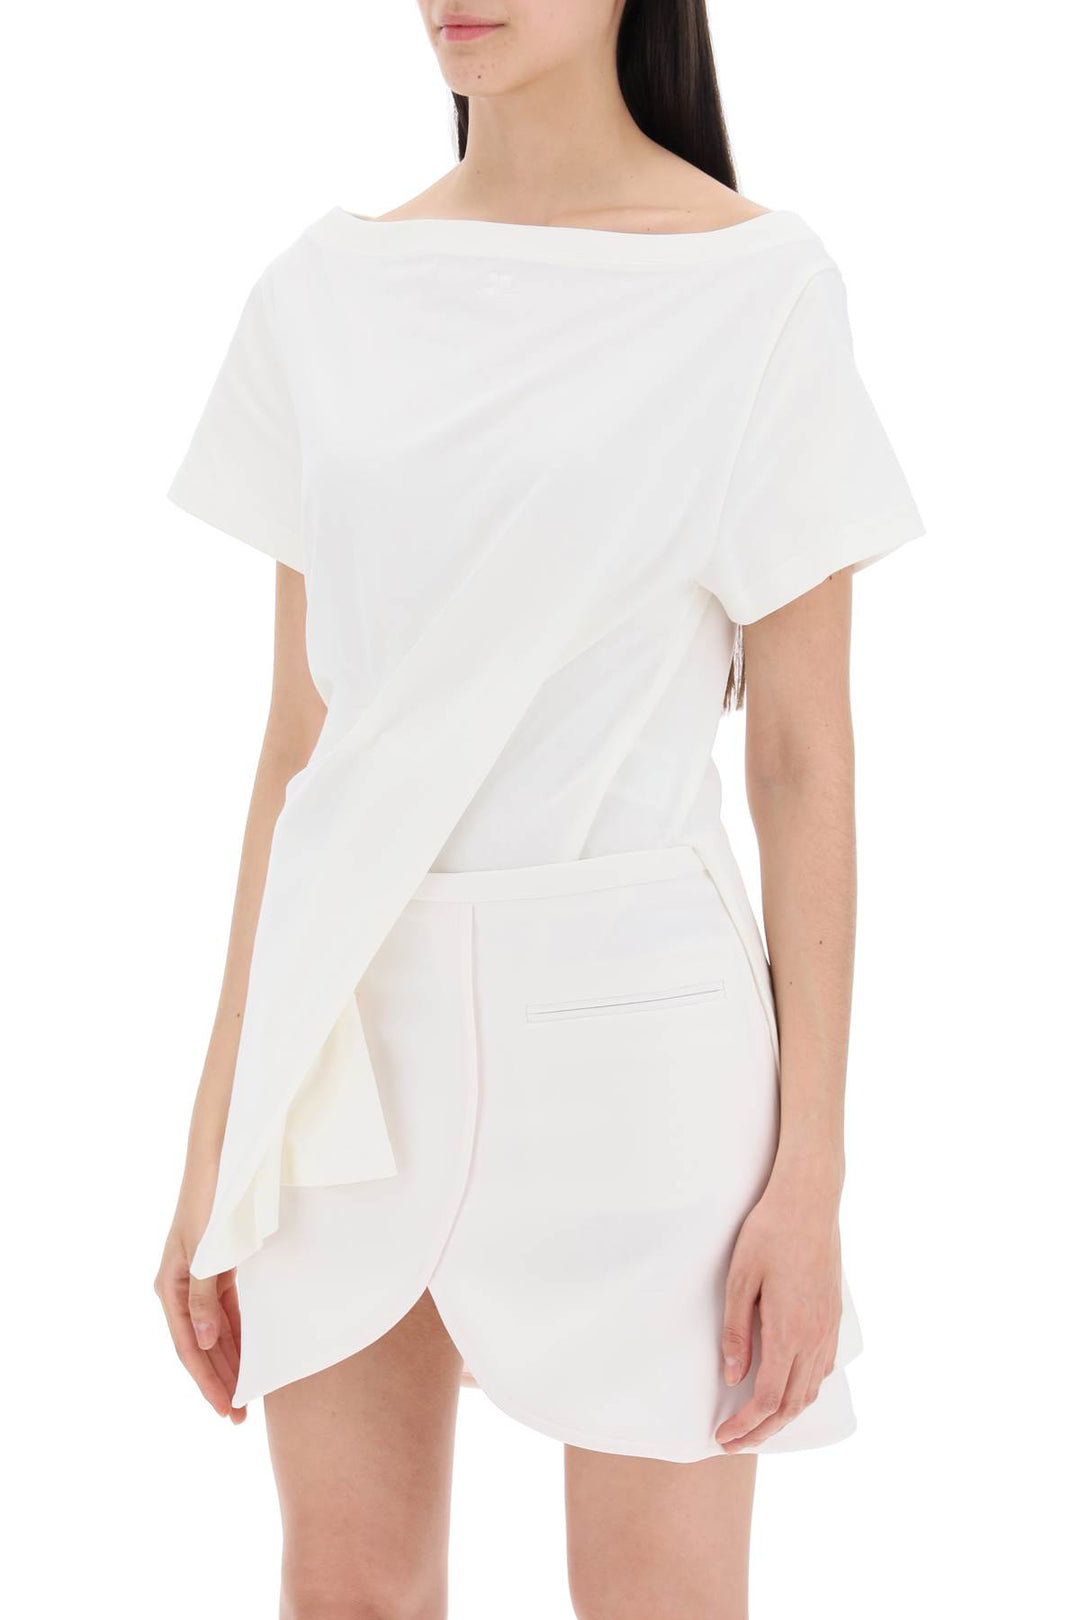 Courreges Twisted Body T Shirt   Bianco